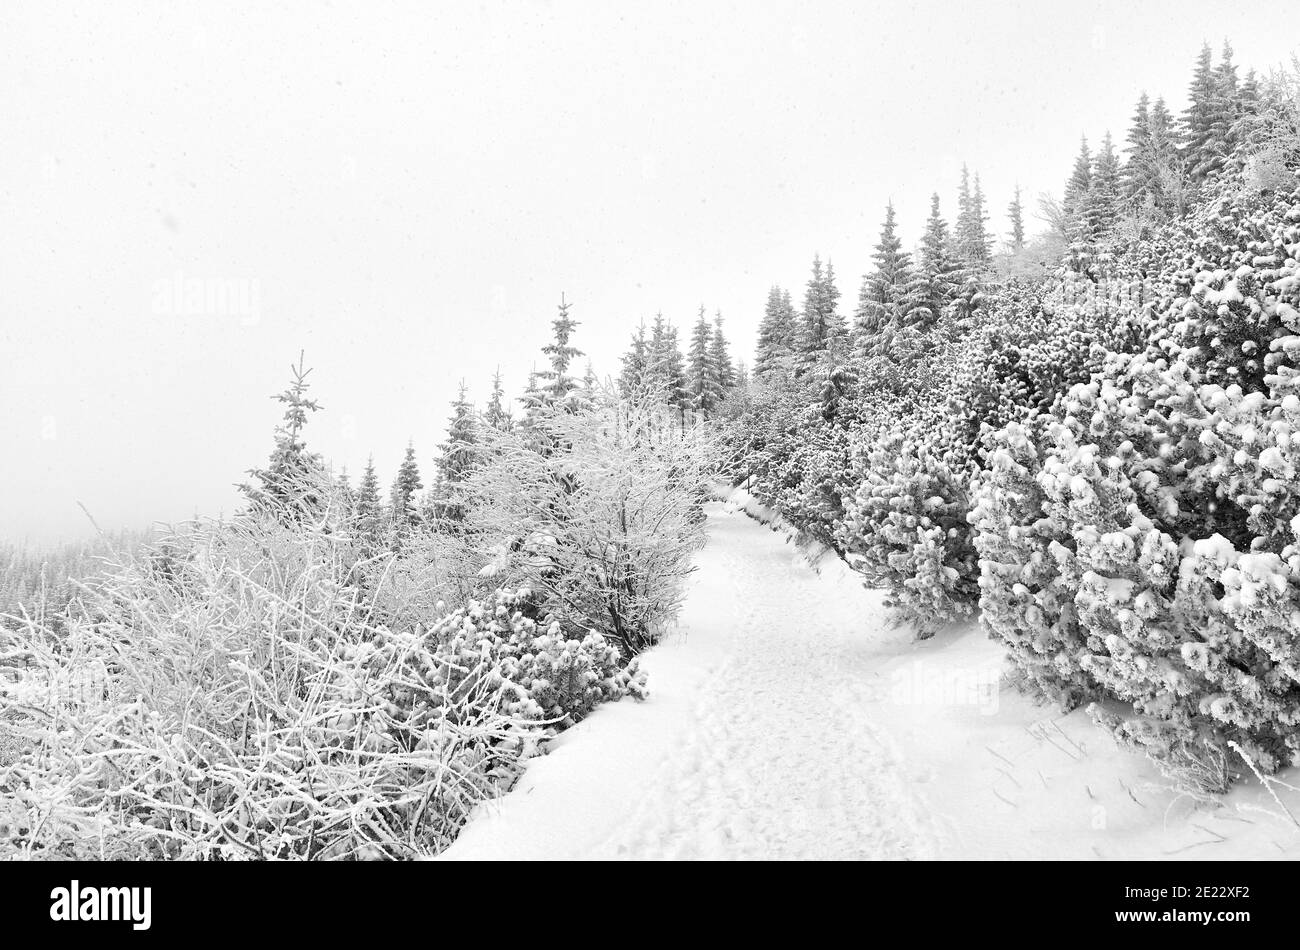 Black and white picture of a mountain path during heavy snowfall. Stock Photo